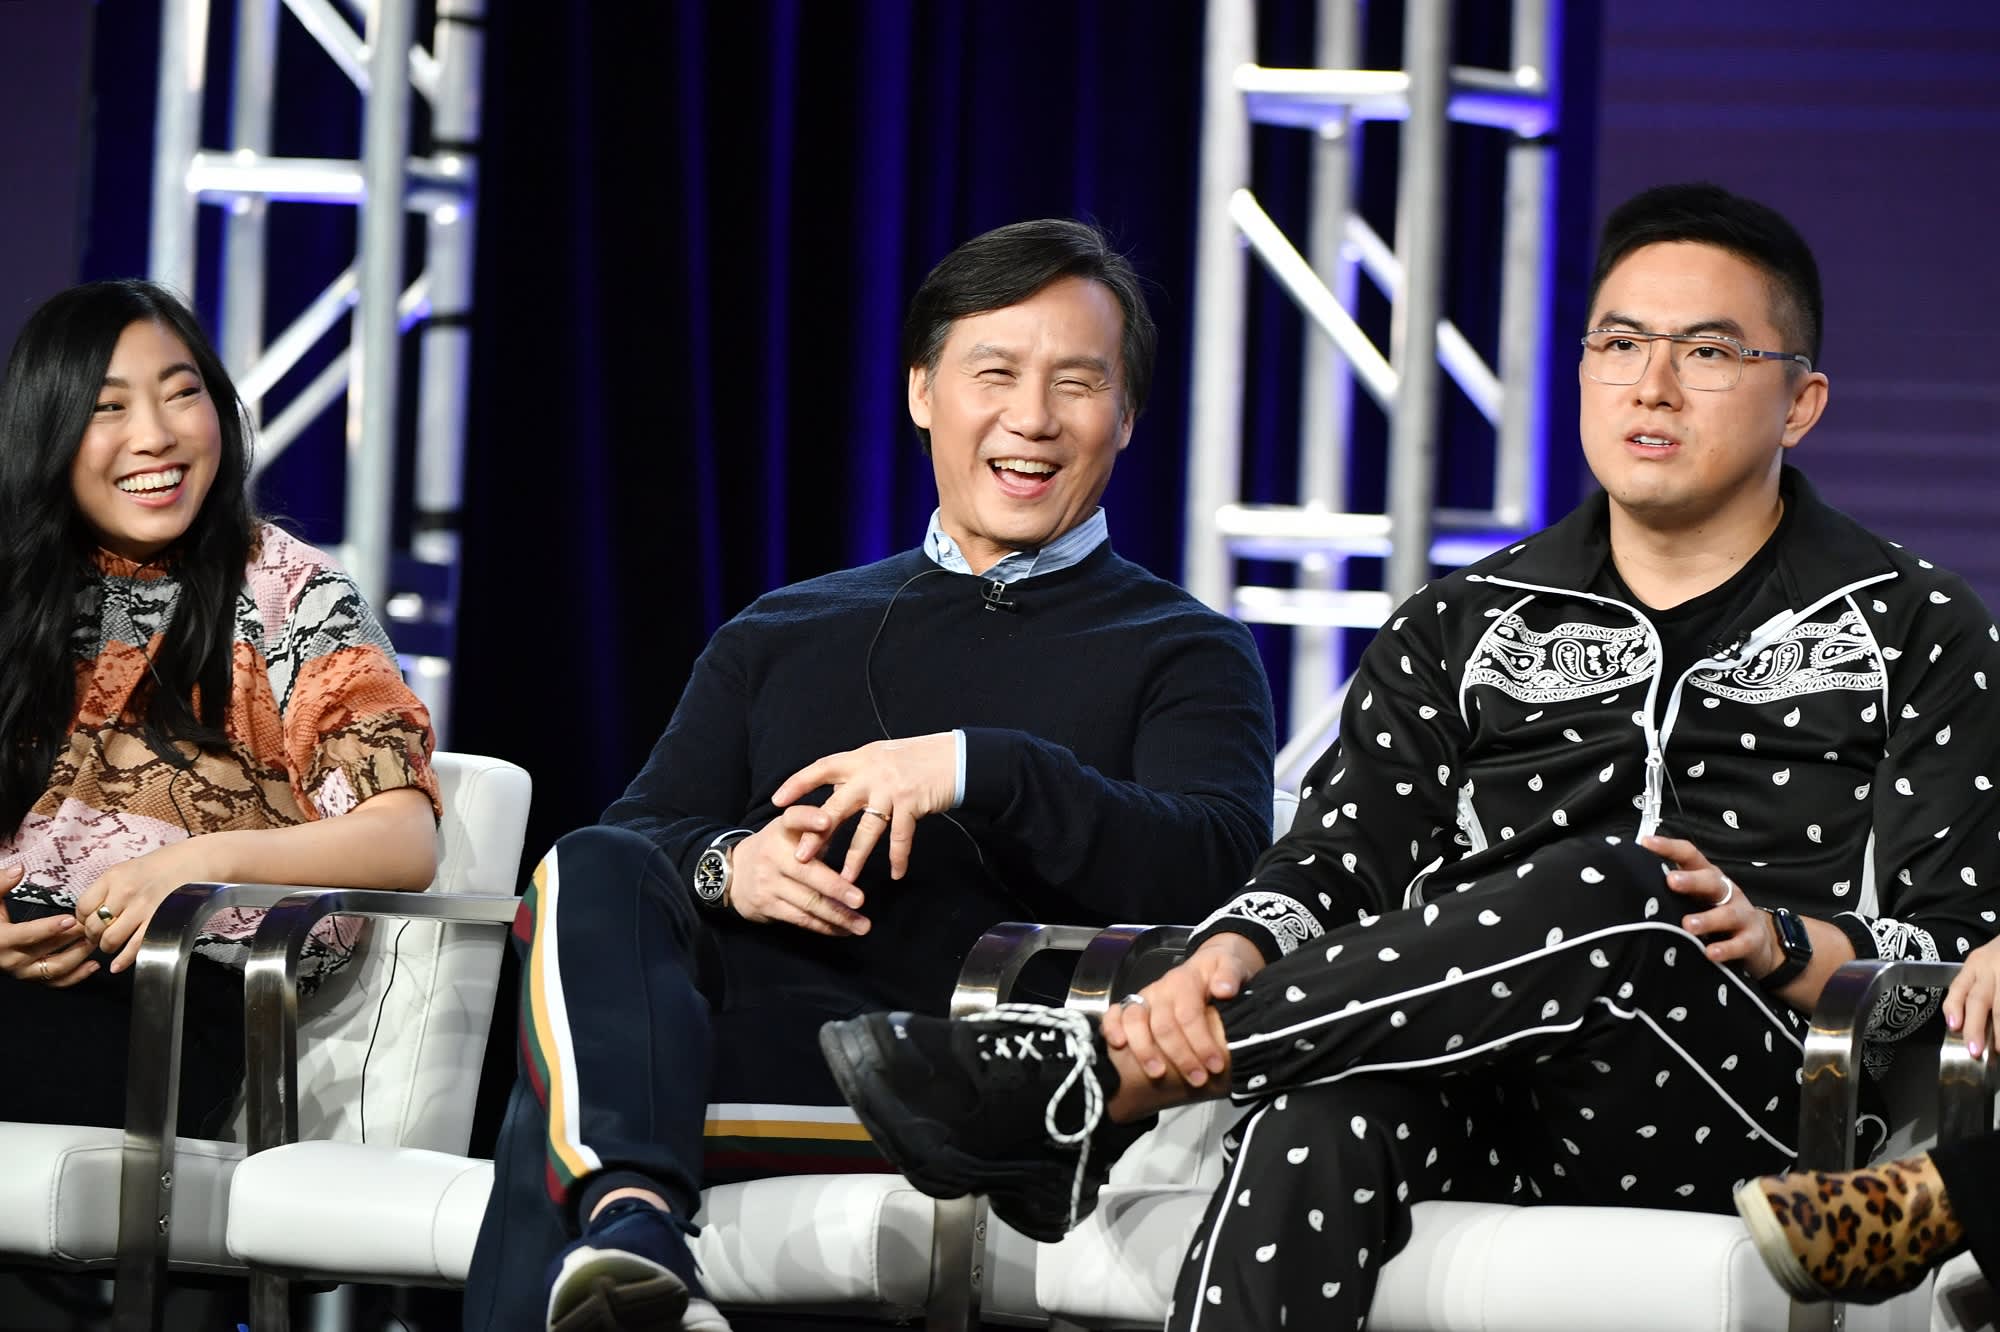 How a $500 plane ticket launched BD Wong's 30-year acting career